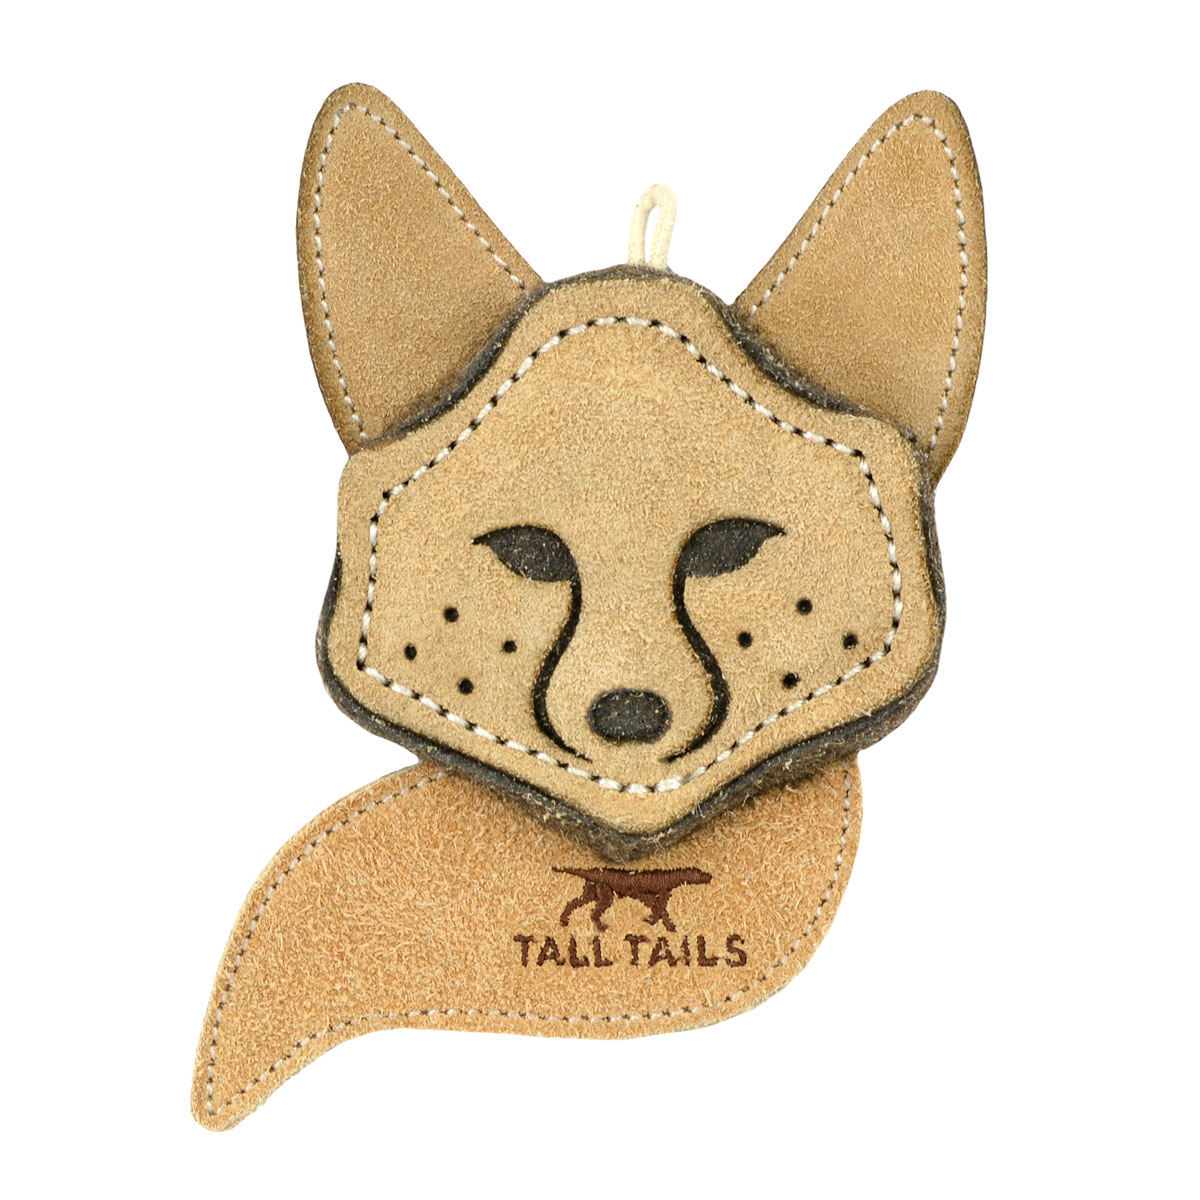 Tall Tails Critter Fox Dog Toy